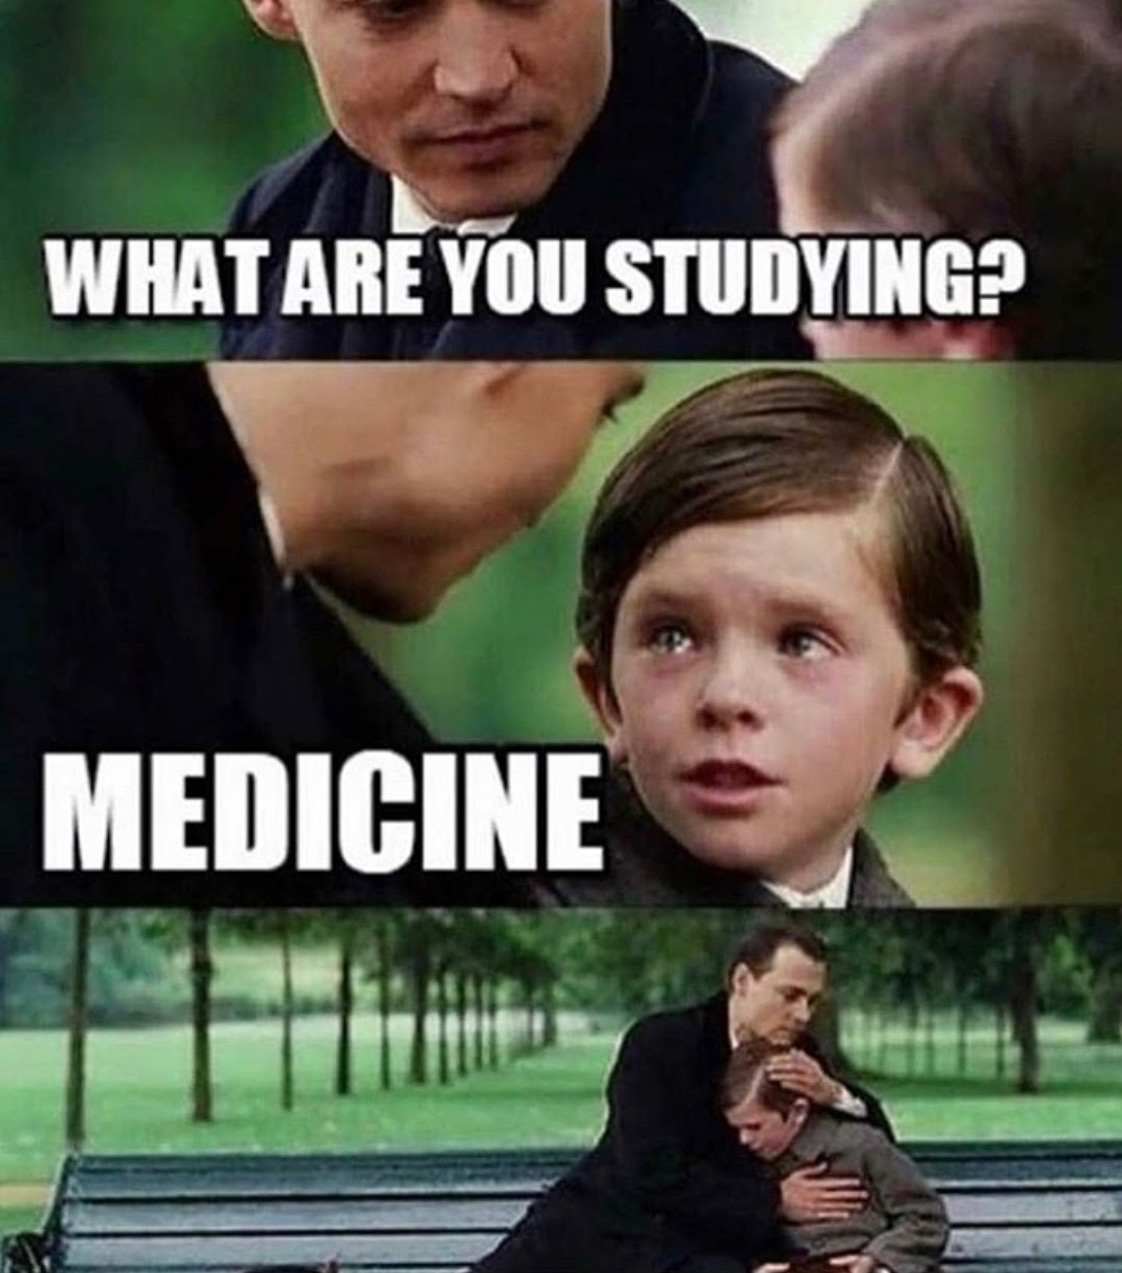 newcastle united jokes - What Are You Studying? Medicine